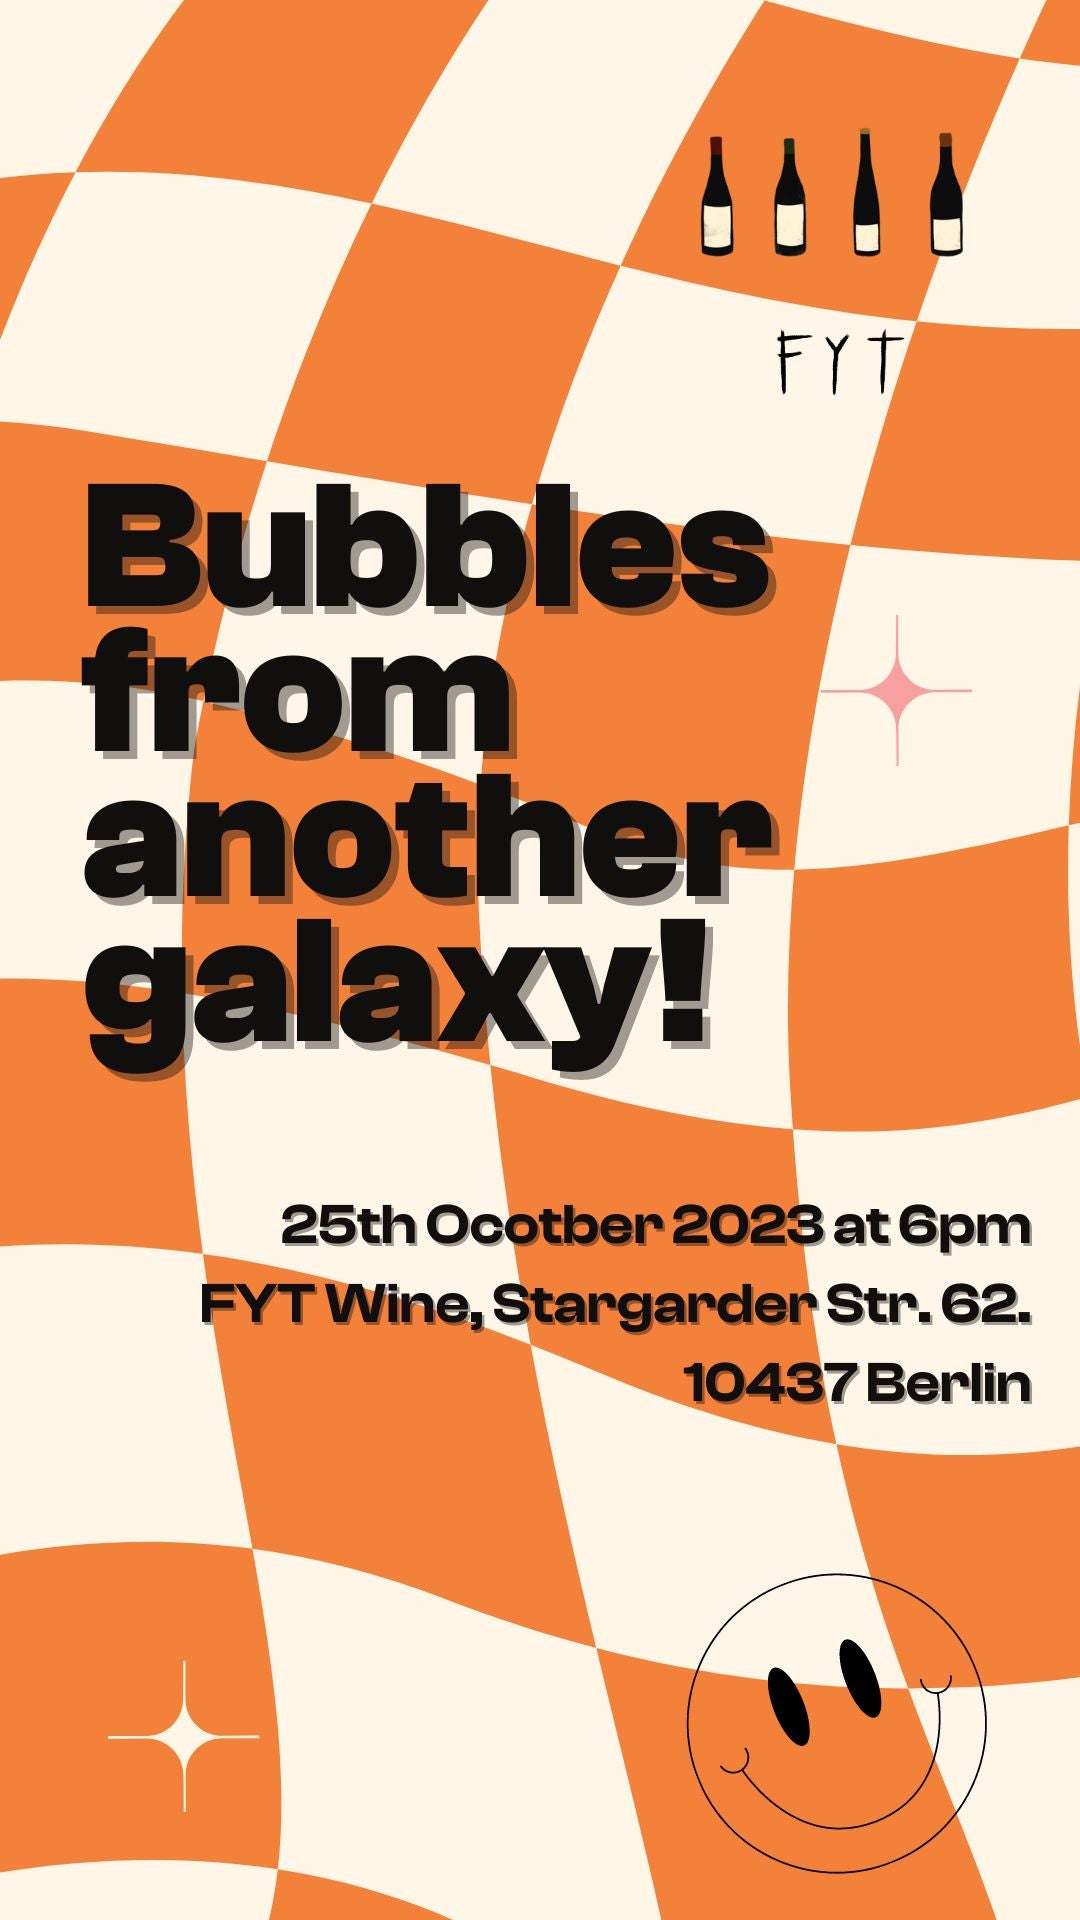 Bubbles from another galaxy! - Wednesday 25th October